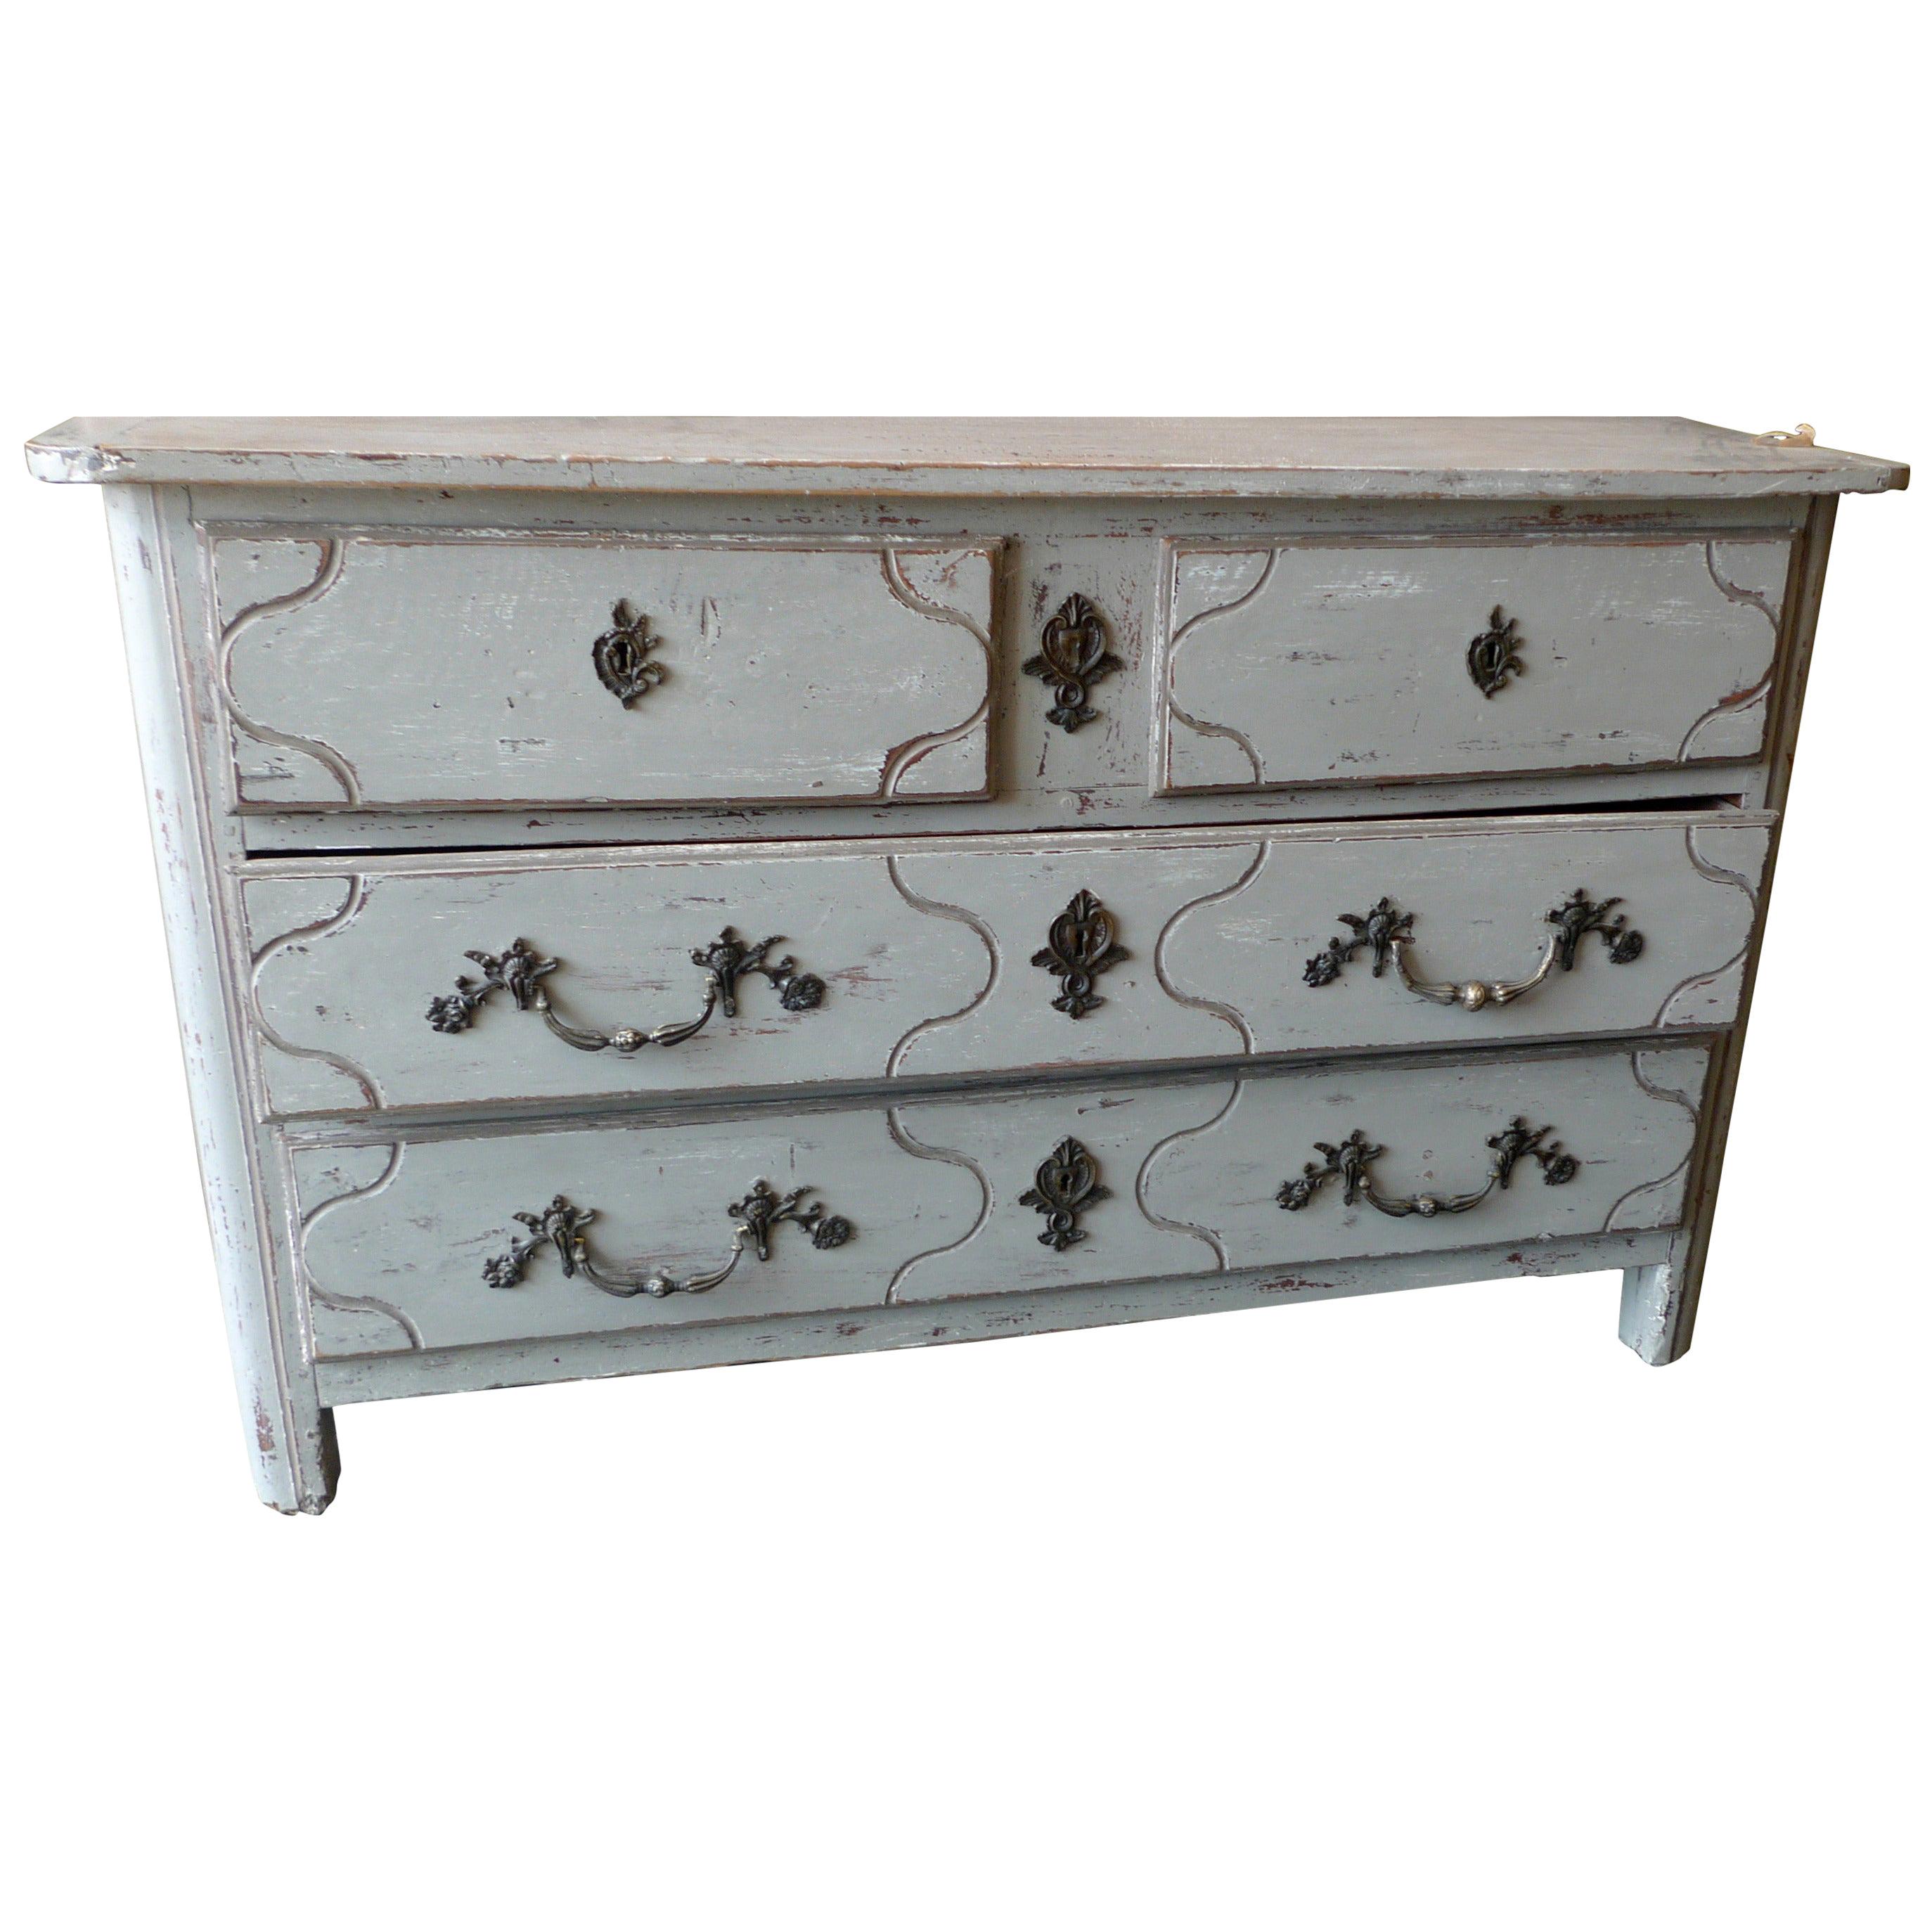 French 18th Century Painted Four-Drawer Chest of Drawers with Original Hardware